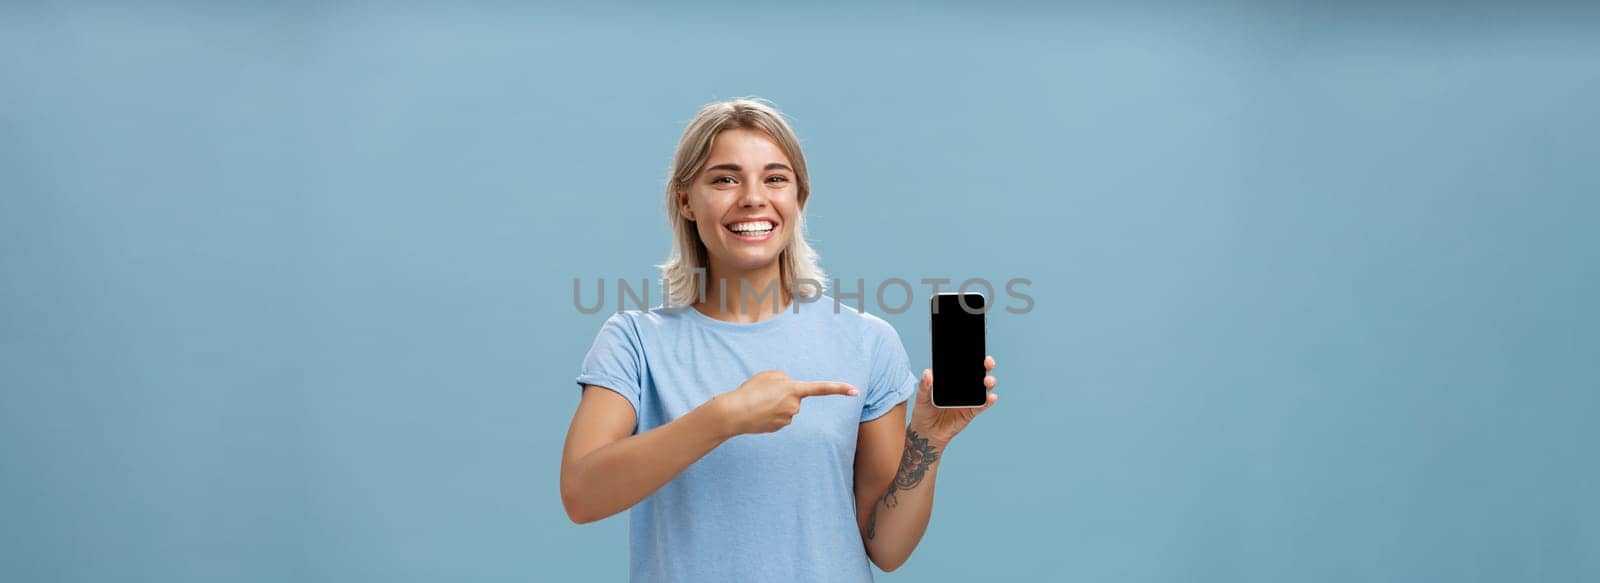 Cute enrgized girl showing smartphone. Charming blonde young female with cool tattoos laughing and smiling from happiness and joy pointing at device holding phone with screen faced to camera.